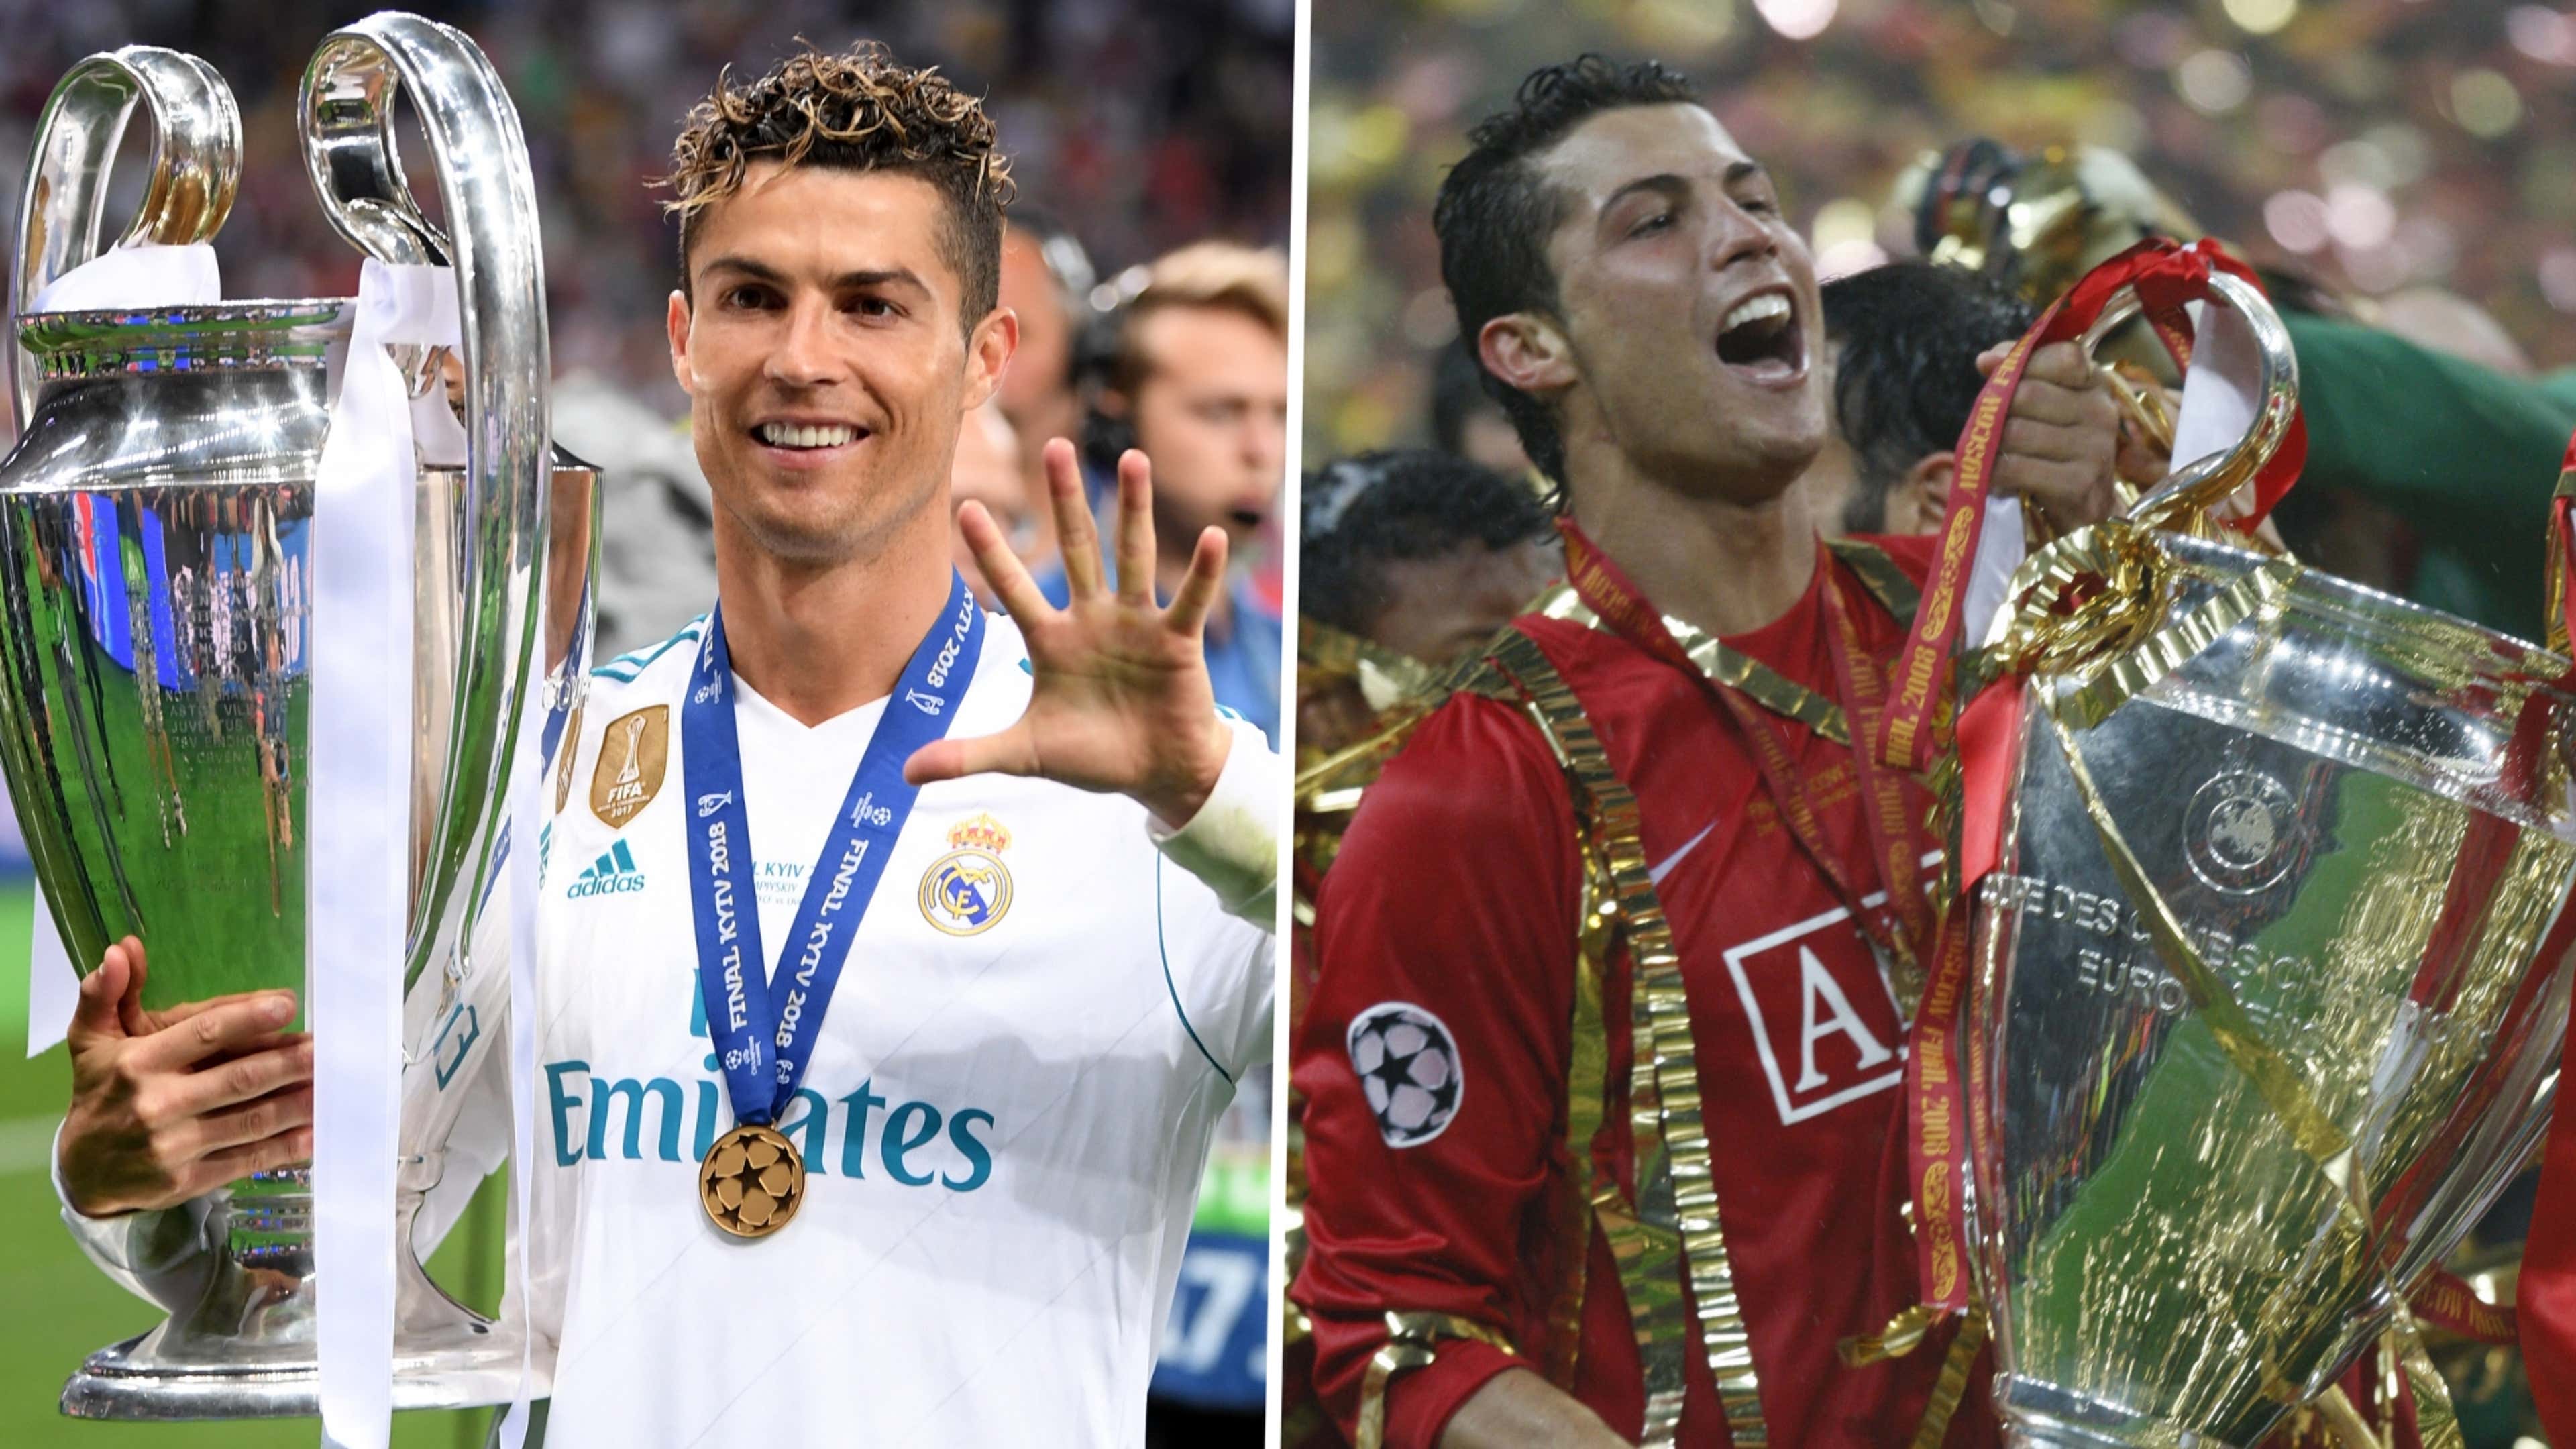 Champions League: What's wrong with Cristiano Ronaldo?